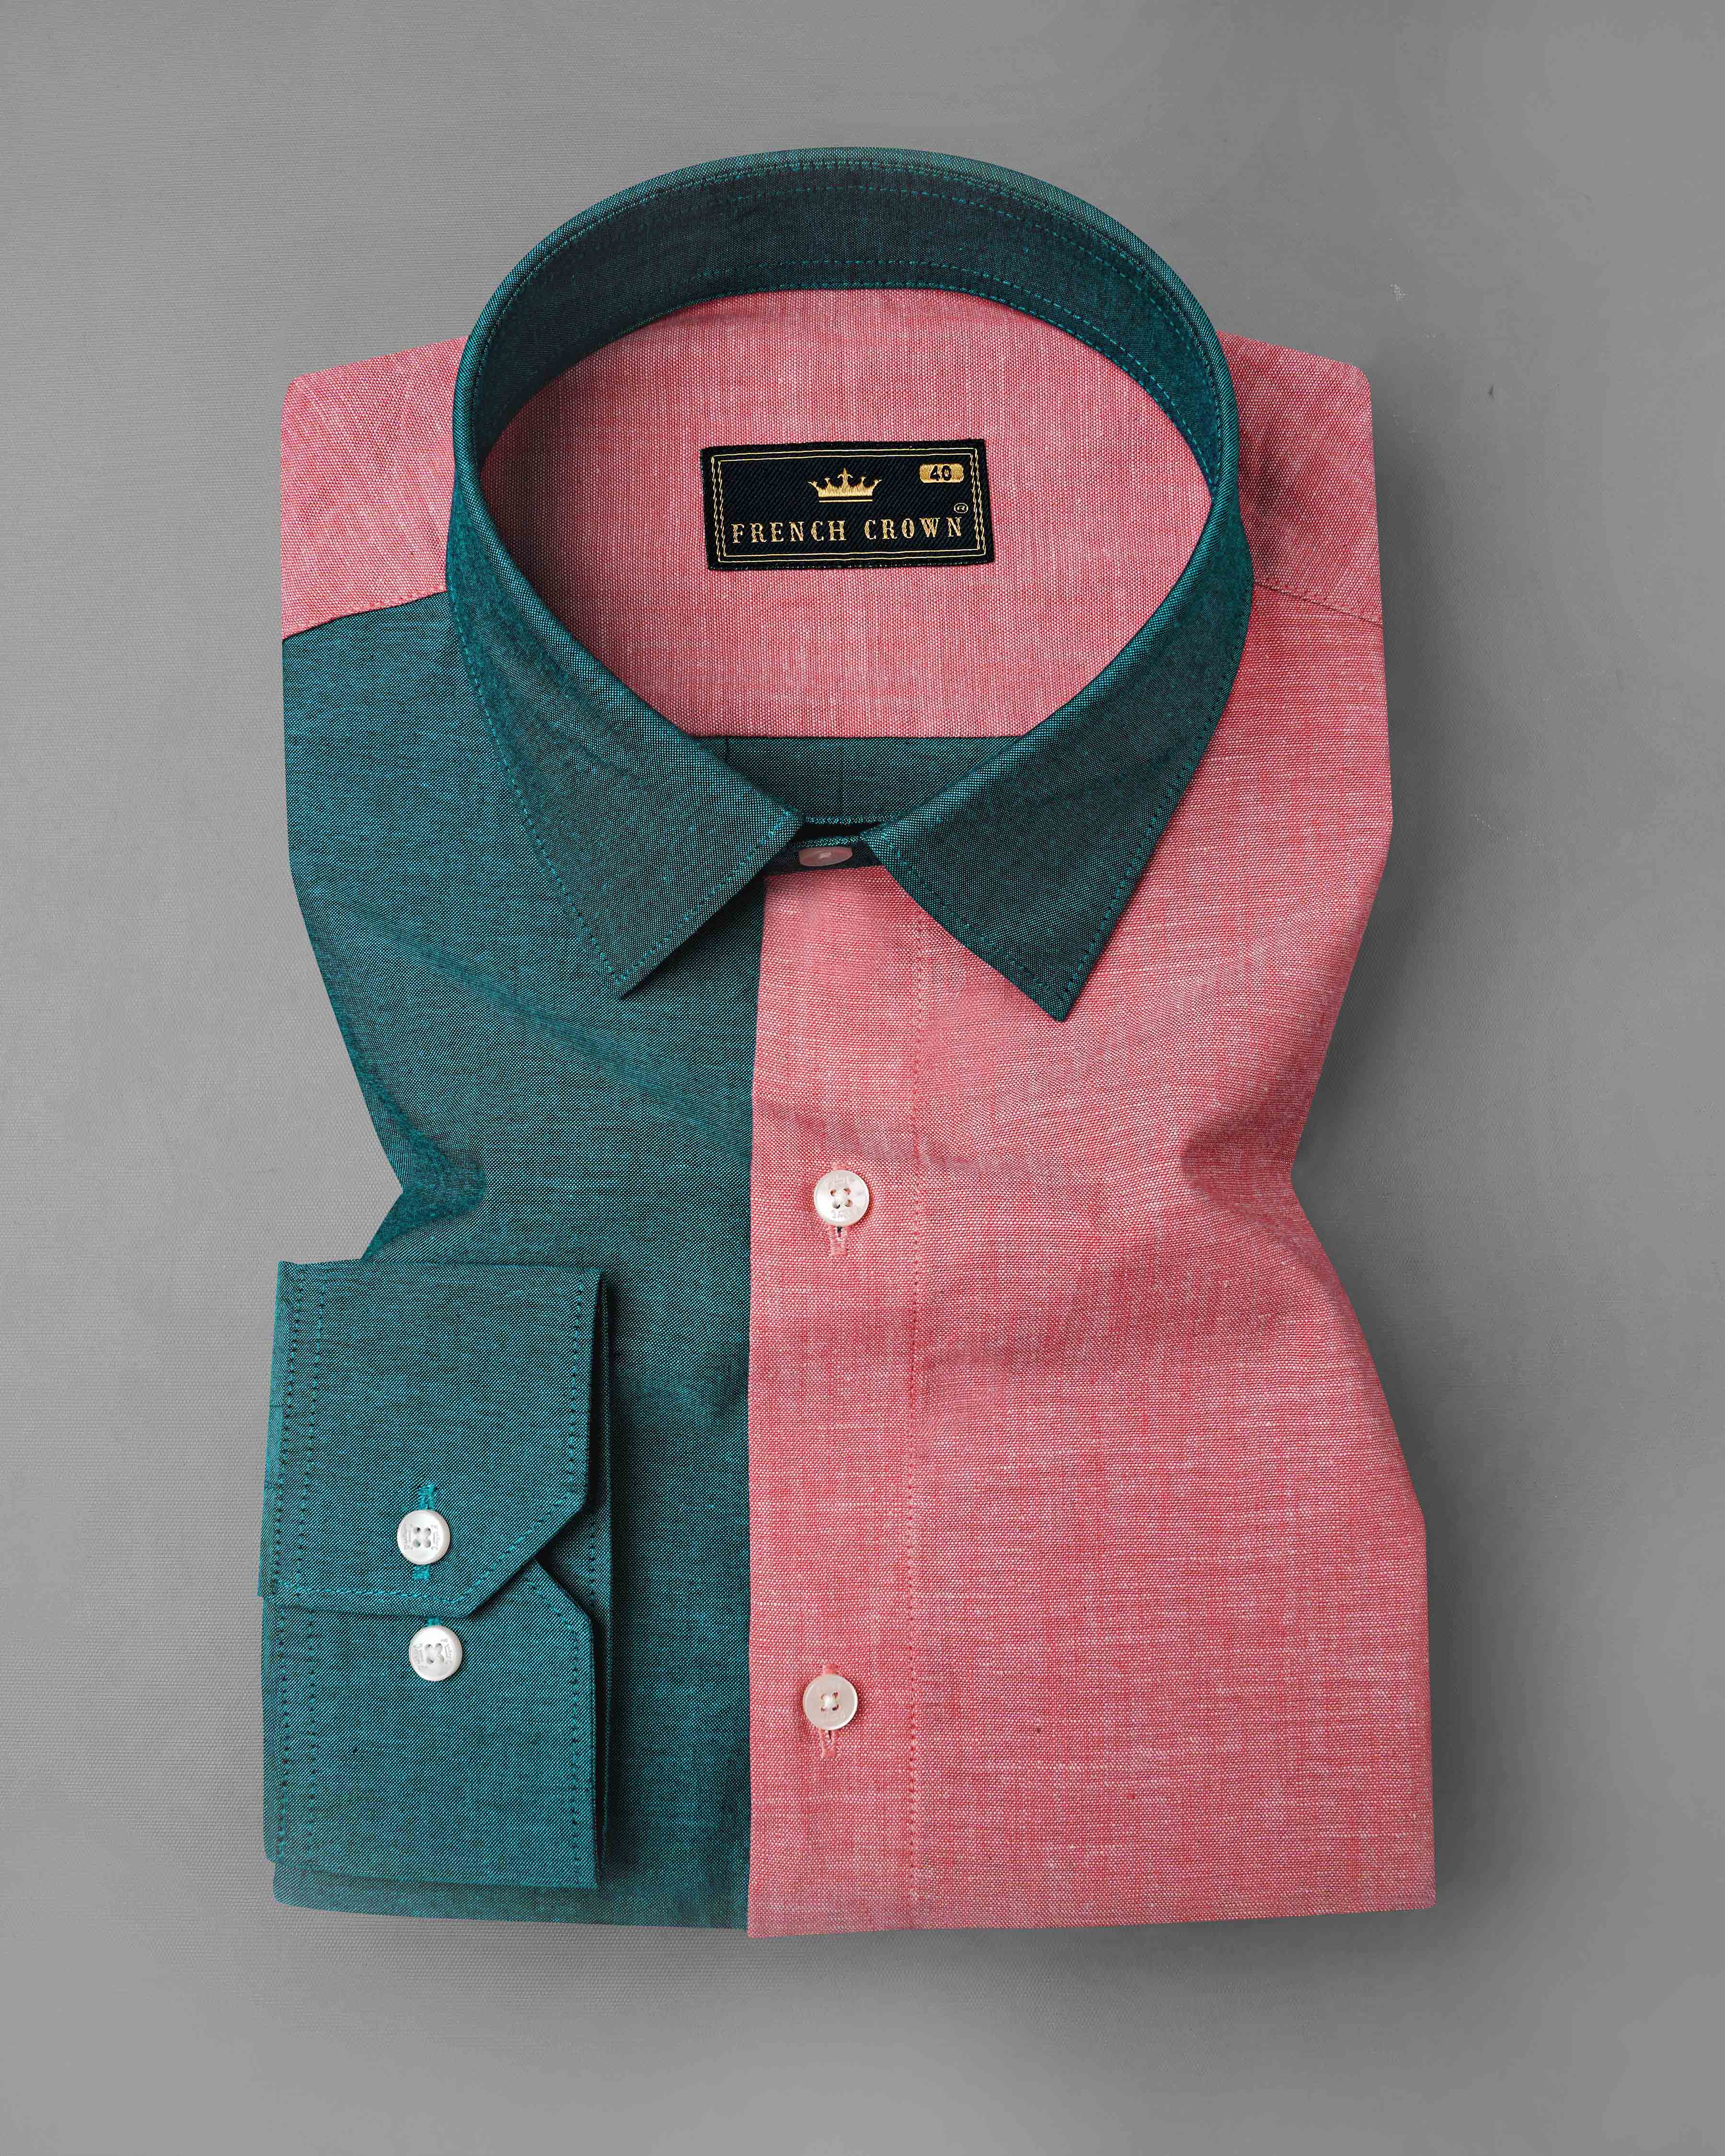 Sherpa Sea Blue and Cranberry Pink Royal Oxford Designer Shirt 8037-P190-38,8037-P190-38,8037-P190-39,8037-P190-39,8037-P190-40,8037-P190-40,8037-P190-42,8037-P190-42,8037-P190-44,8037-P190-44,8037-P190-46,8037-P190-46,8037-P190-48,8037-P190-48,8037-P190-50,8037-P190-50,8037-P190-52,8037-P190-52